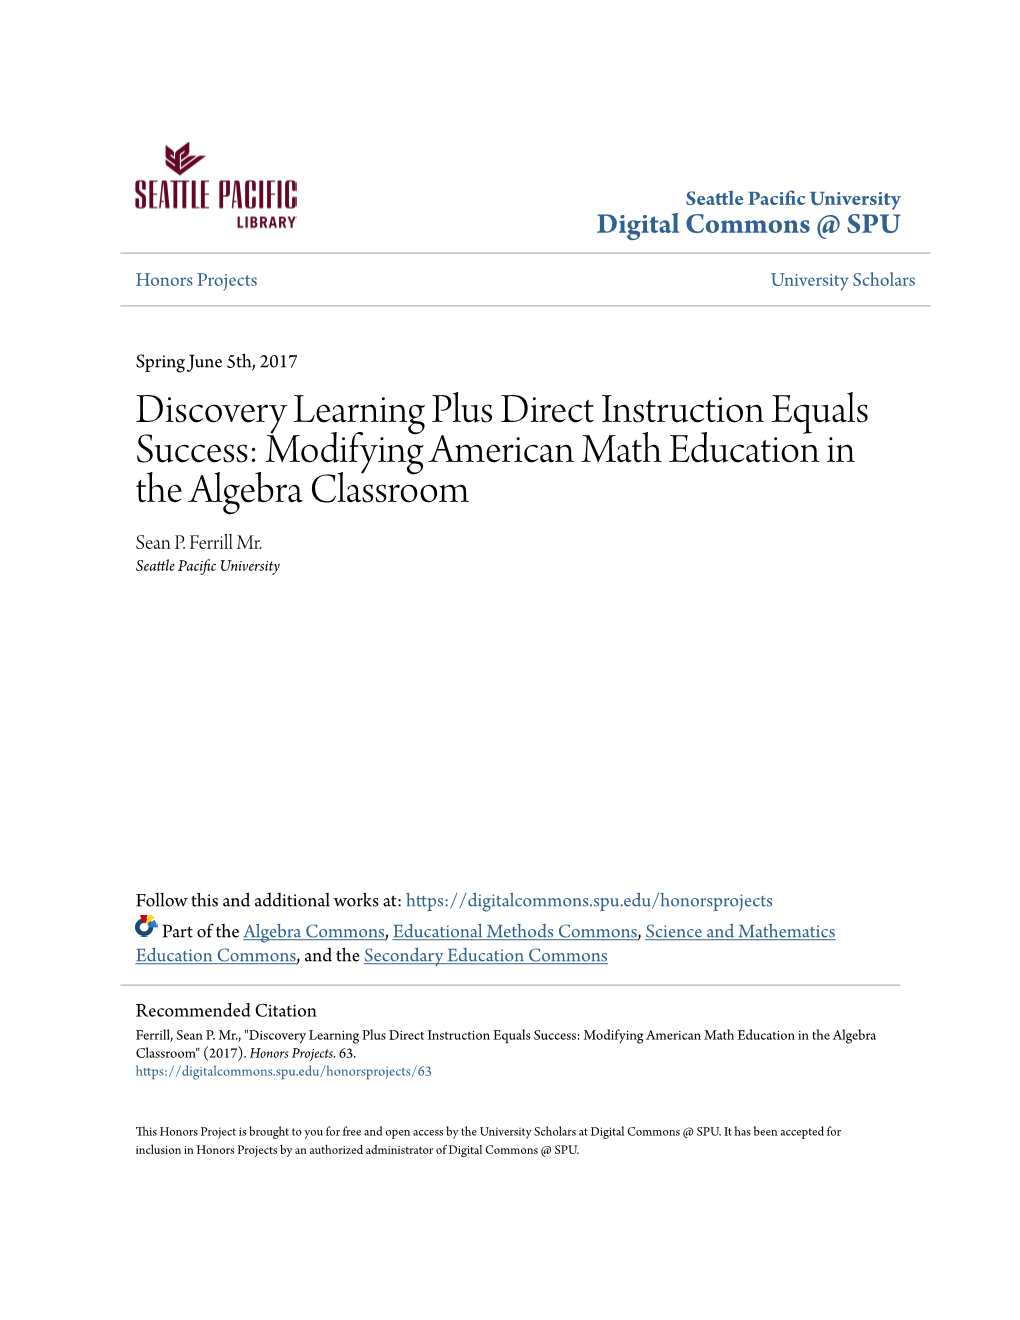 Discovery Learning Plus Direct Instruction Equals Success: Modifying American Math Education in the Algebra Classroom Sean P